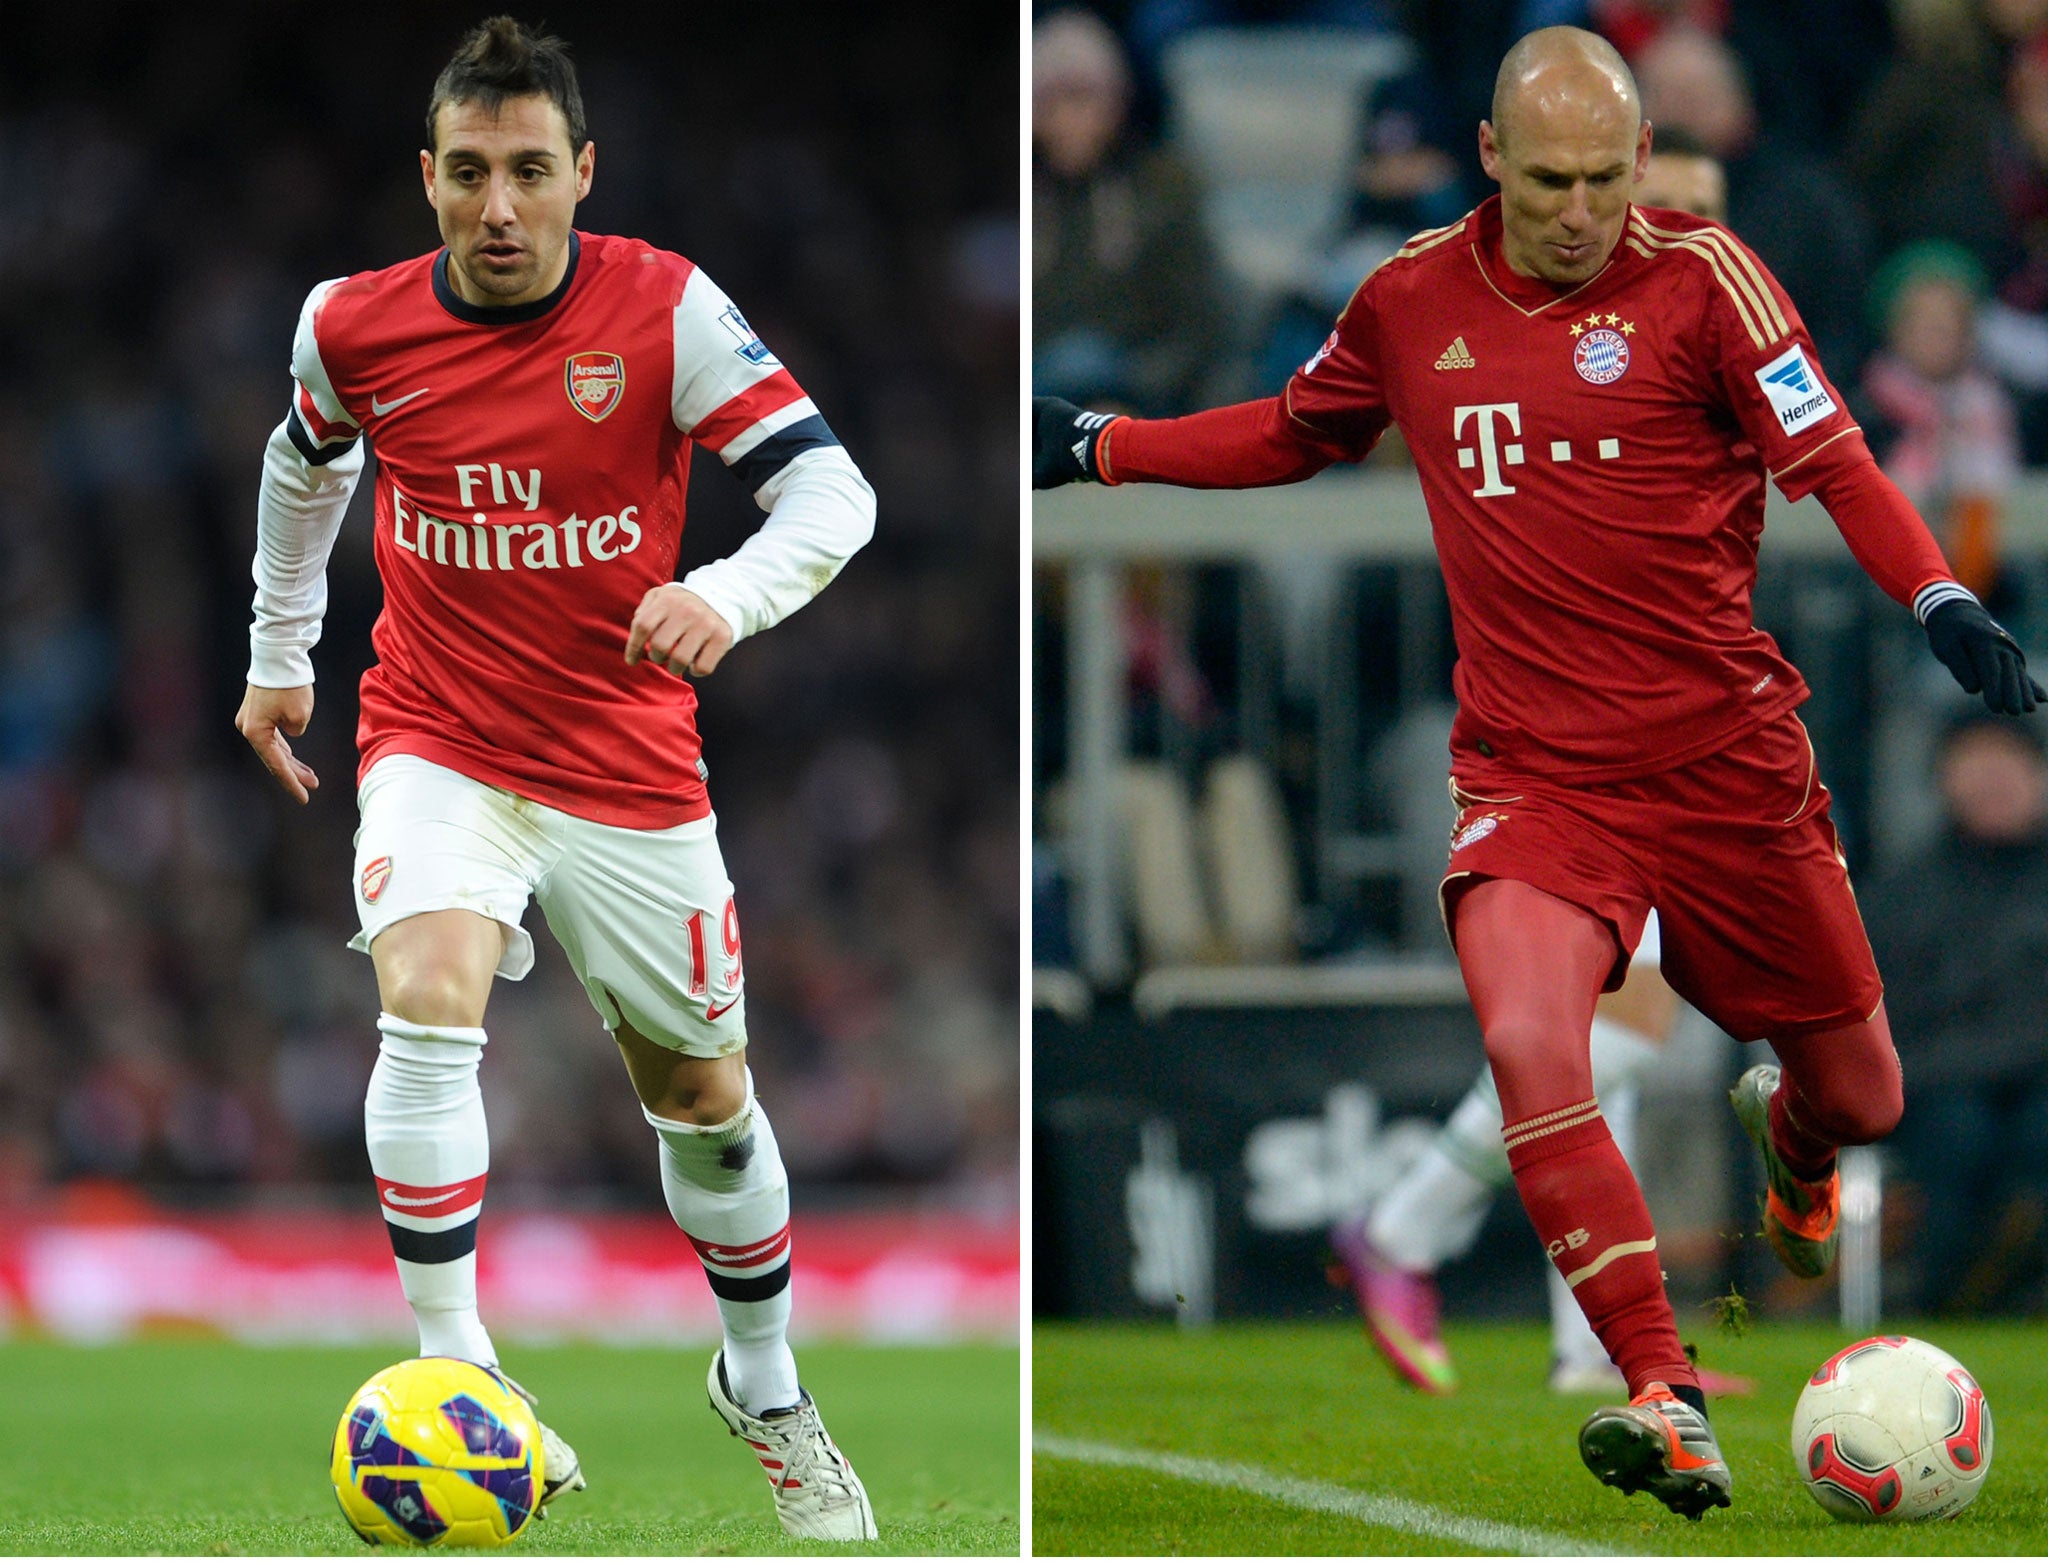 Arsenal's Santi Cazorla (left) and Bayern Munich's Arjen Robben. The two sides face off at The Emirates tonight